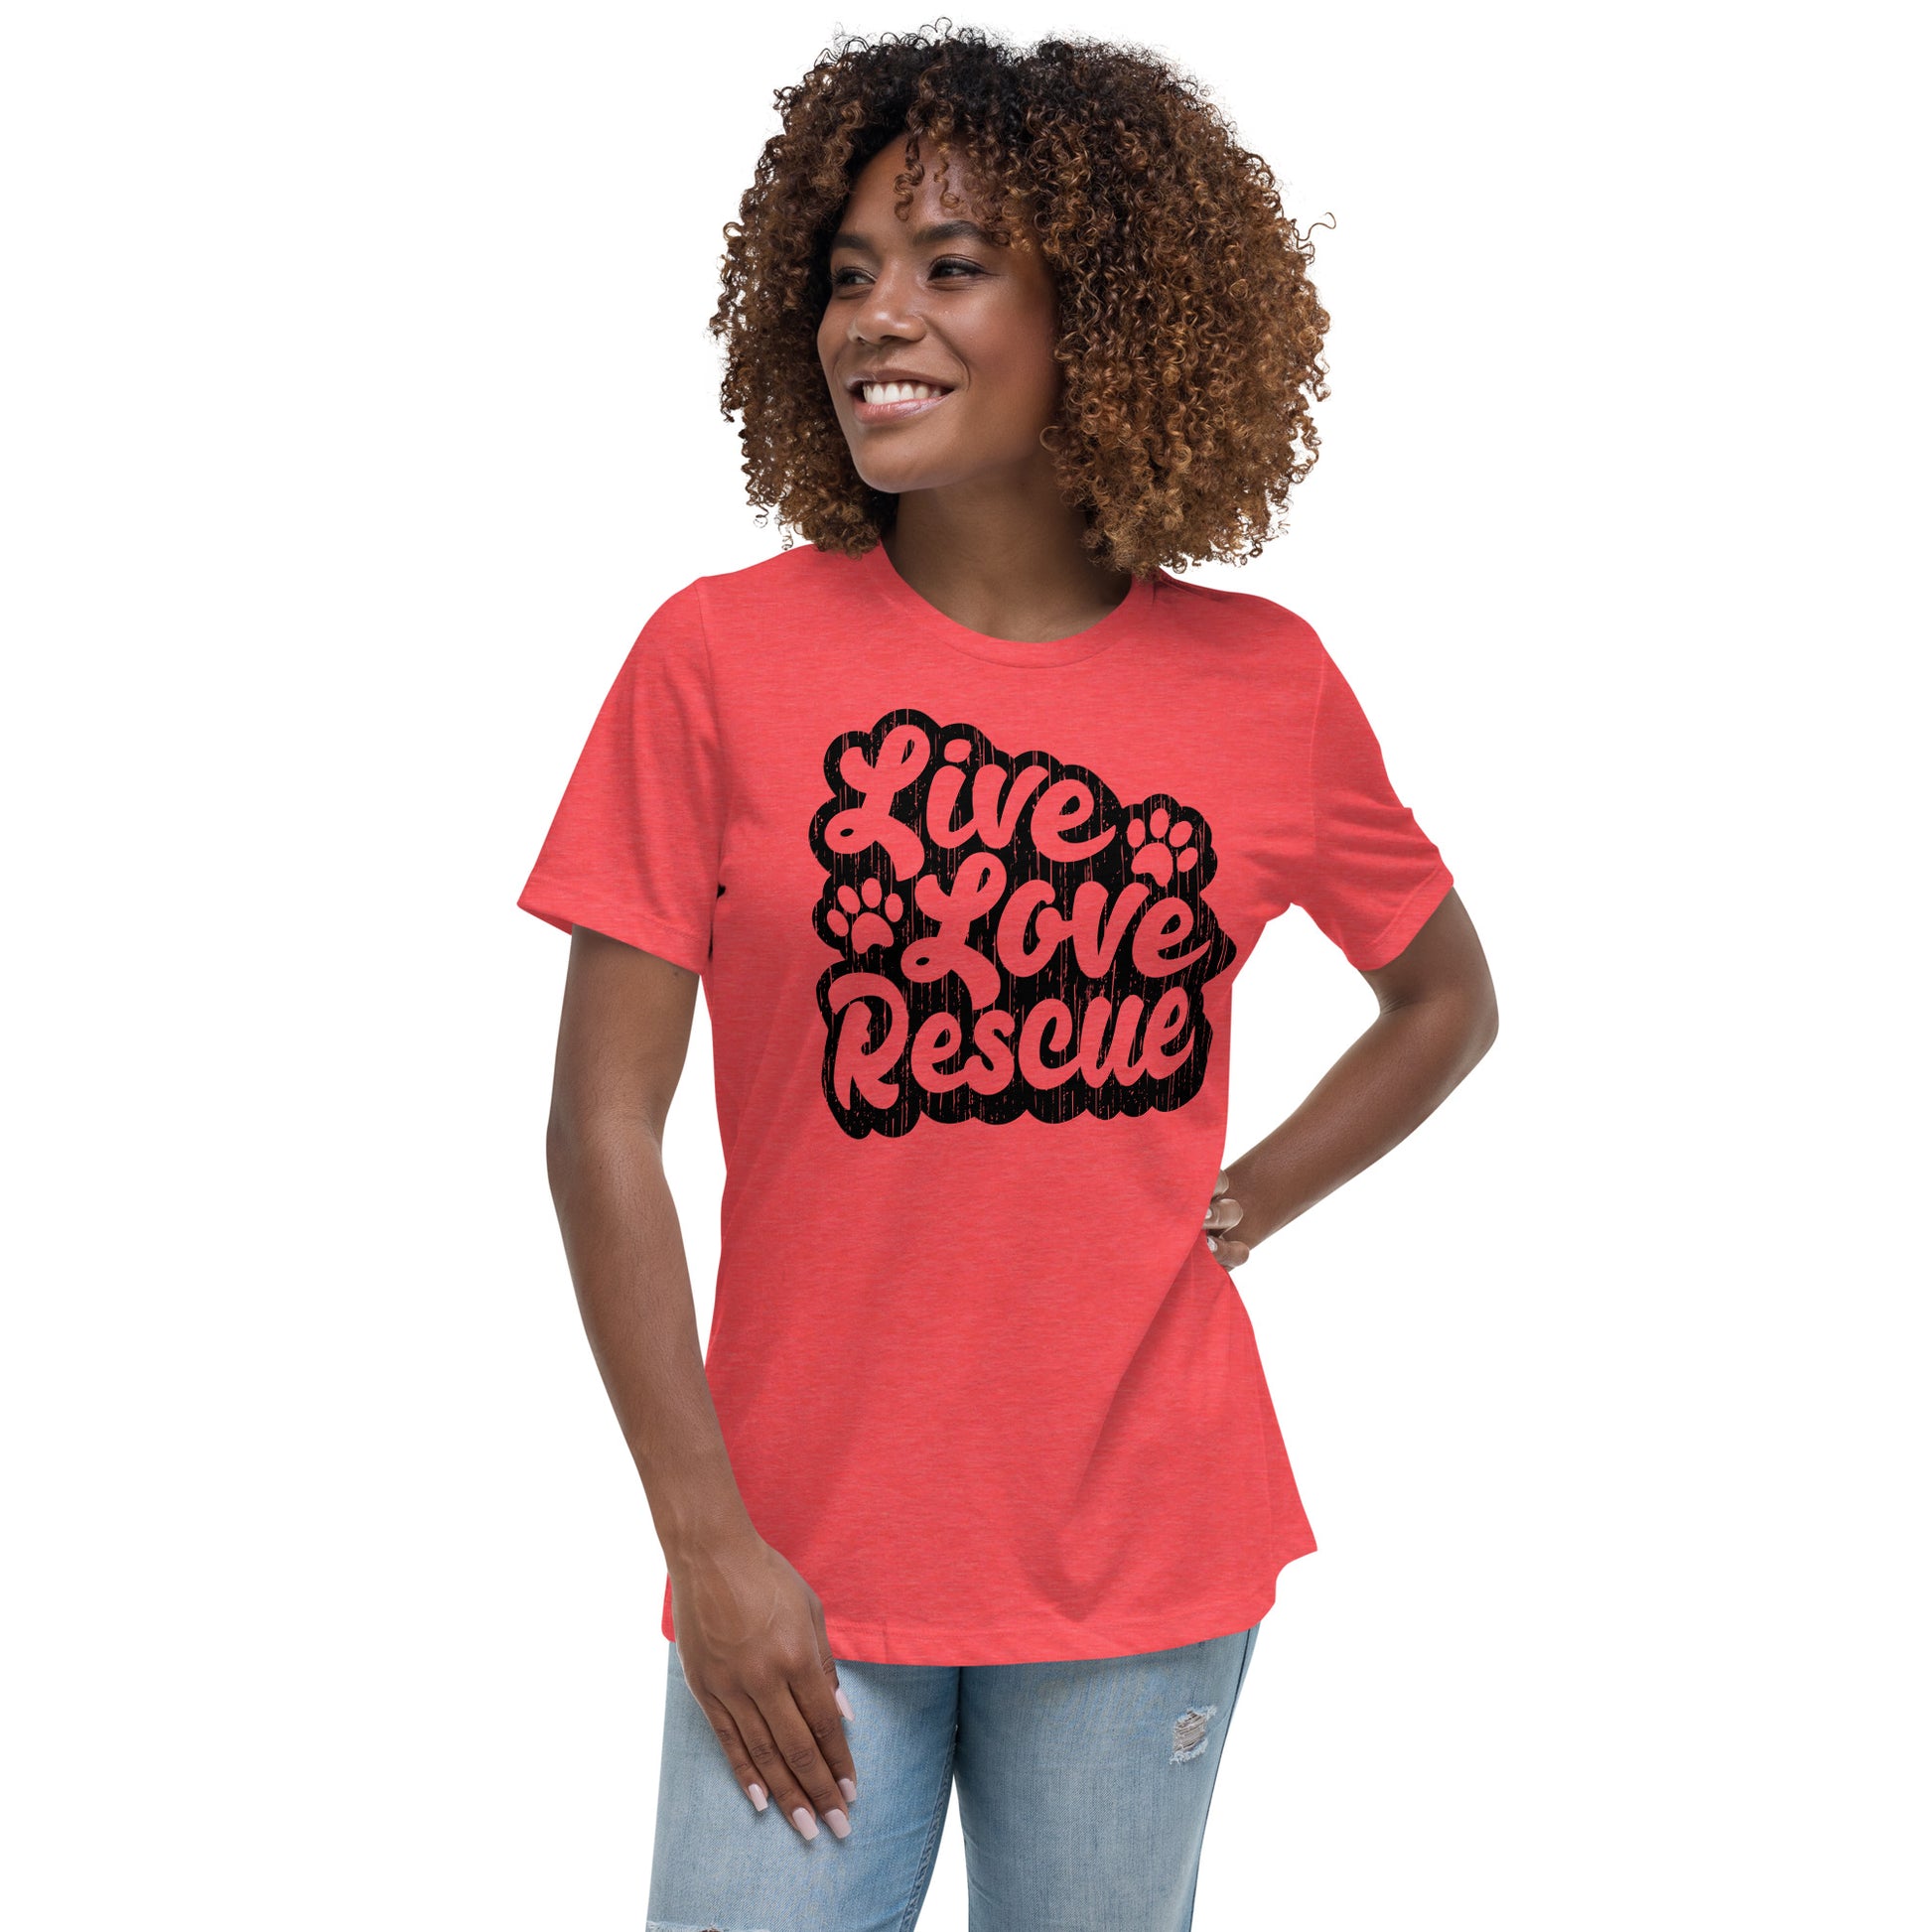 Live love rescue retro women’s relaxed fit t-shirts by Dog Artistry red color